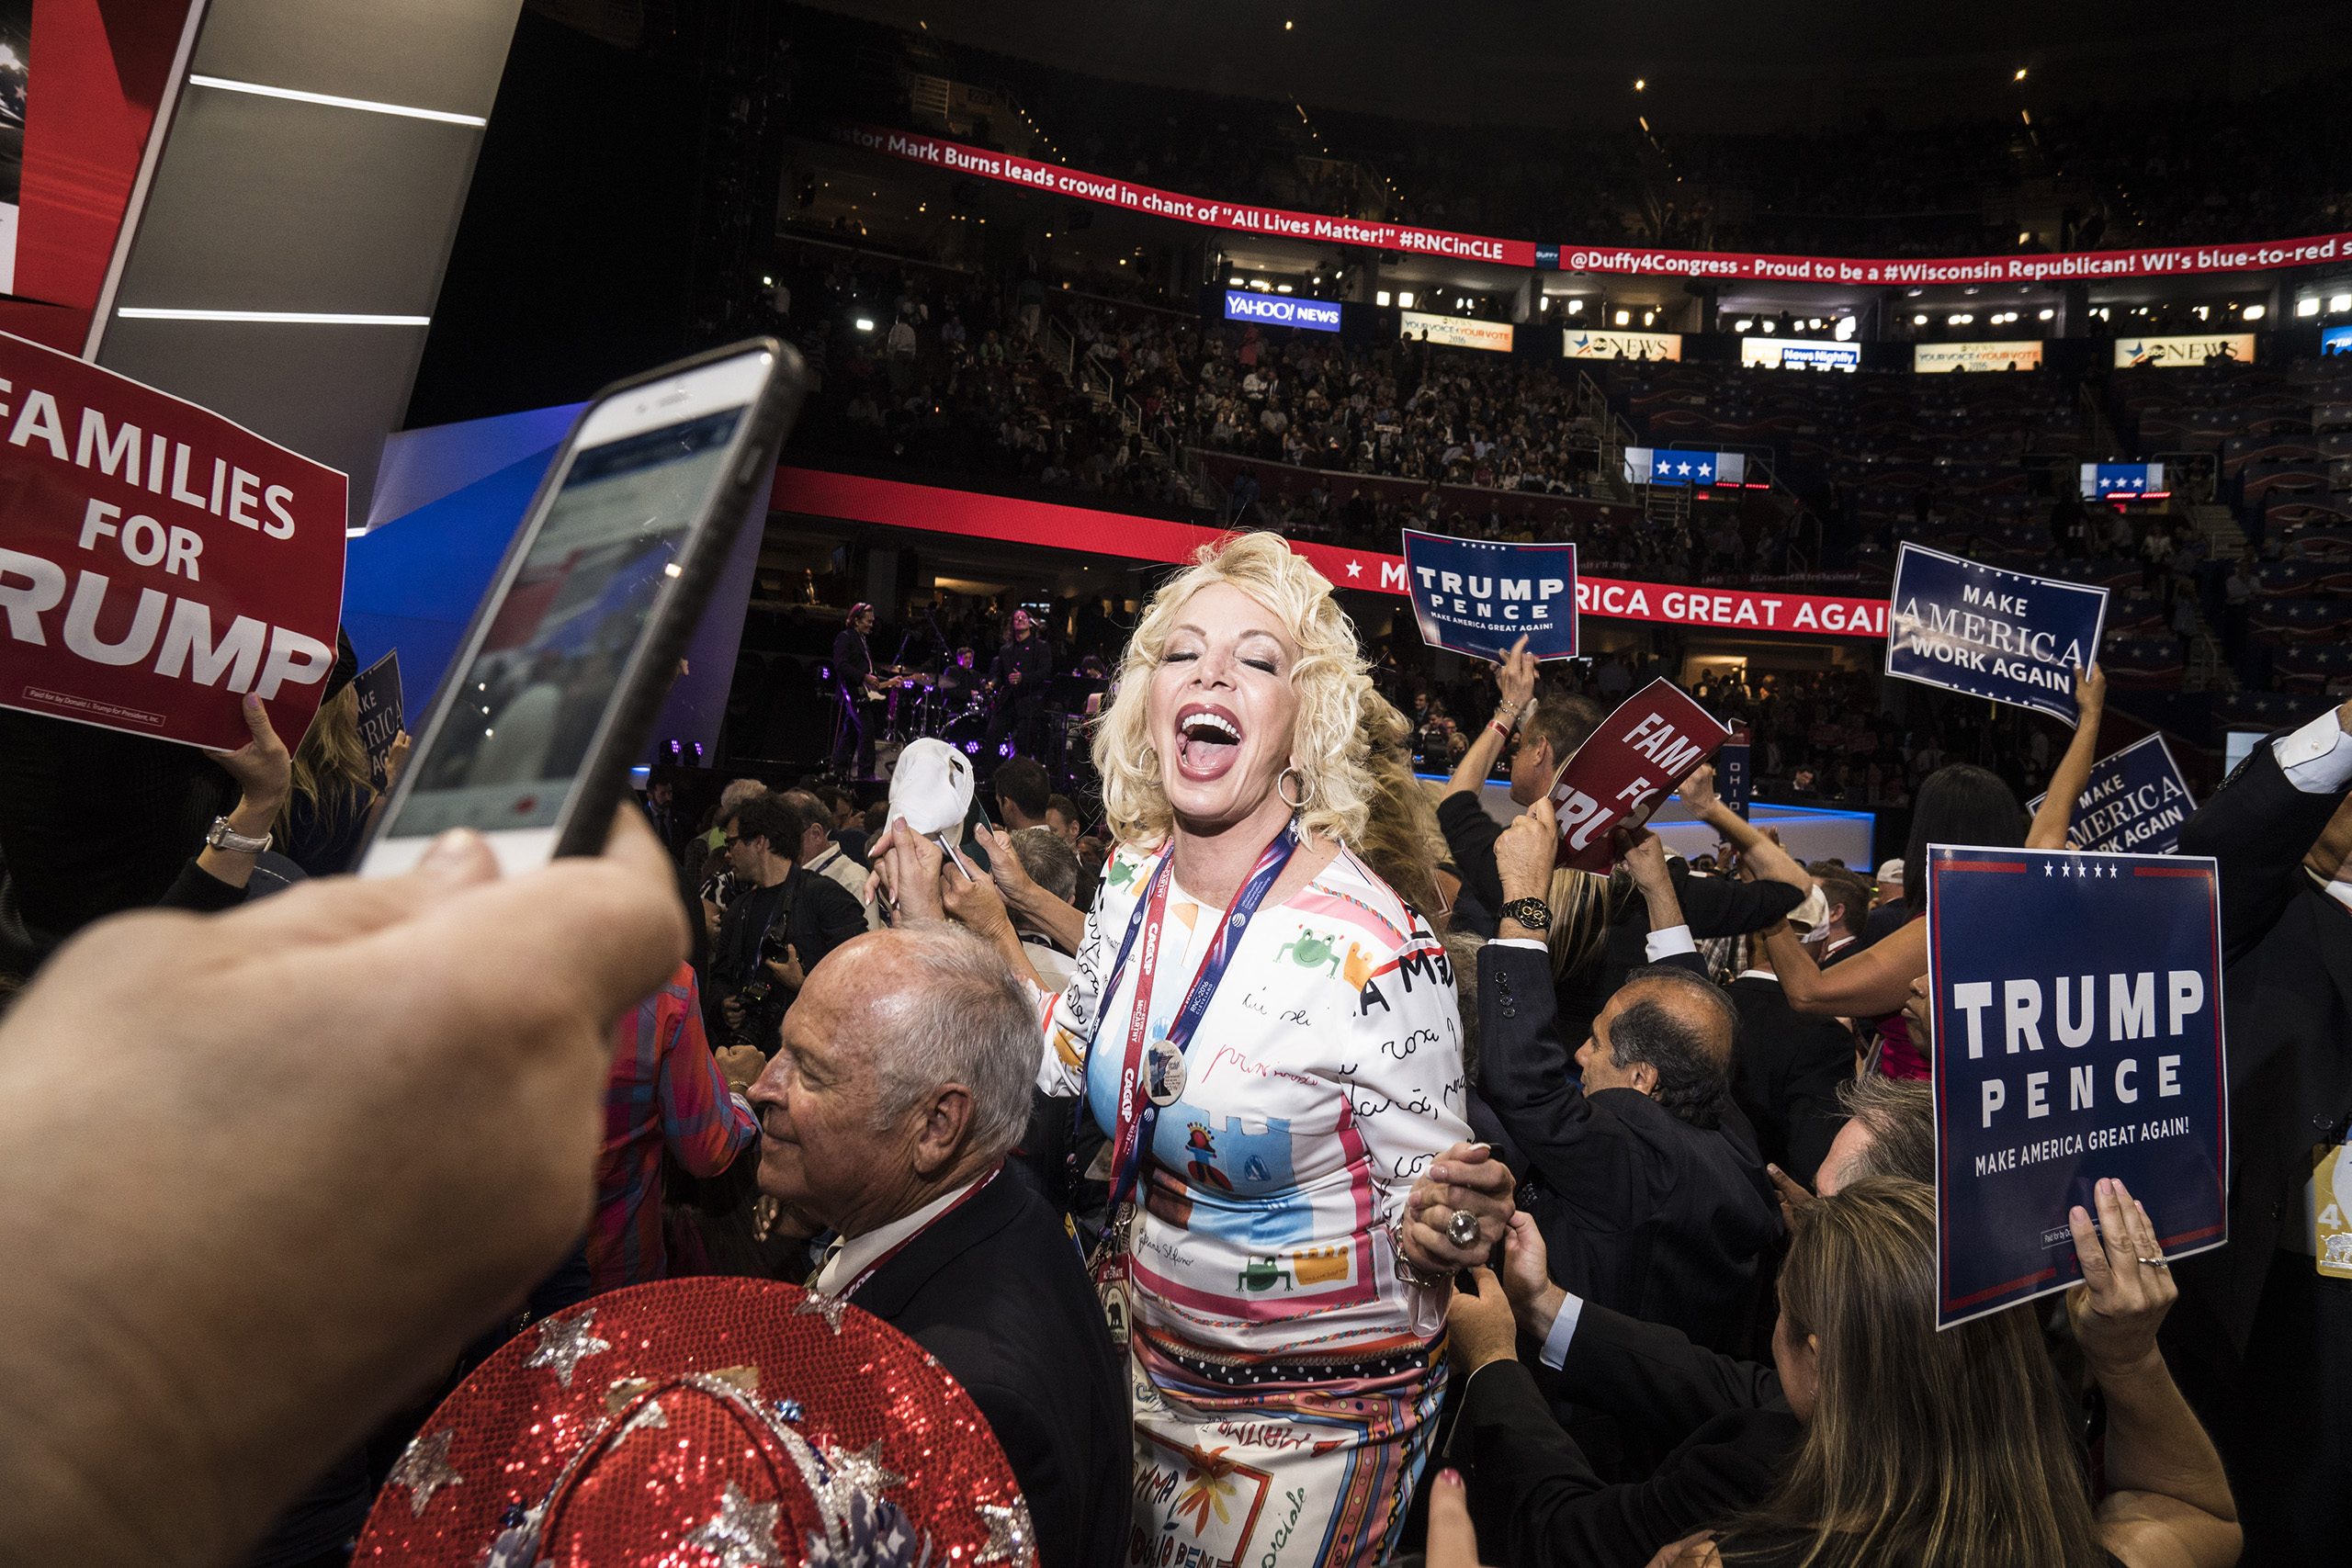 A Trump supporter celebrates at the end of  the Republican National Convention on July 21, 2016 at the Quicken Loans Arena in Cleveland, Ohio.